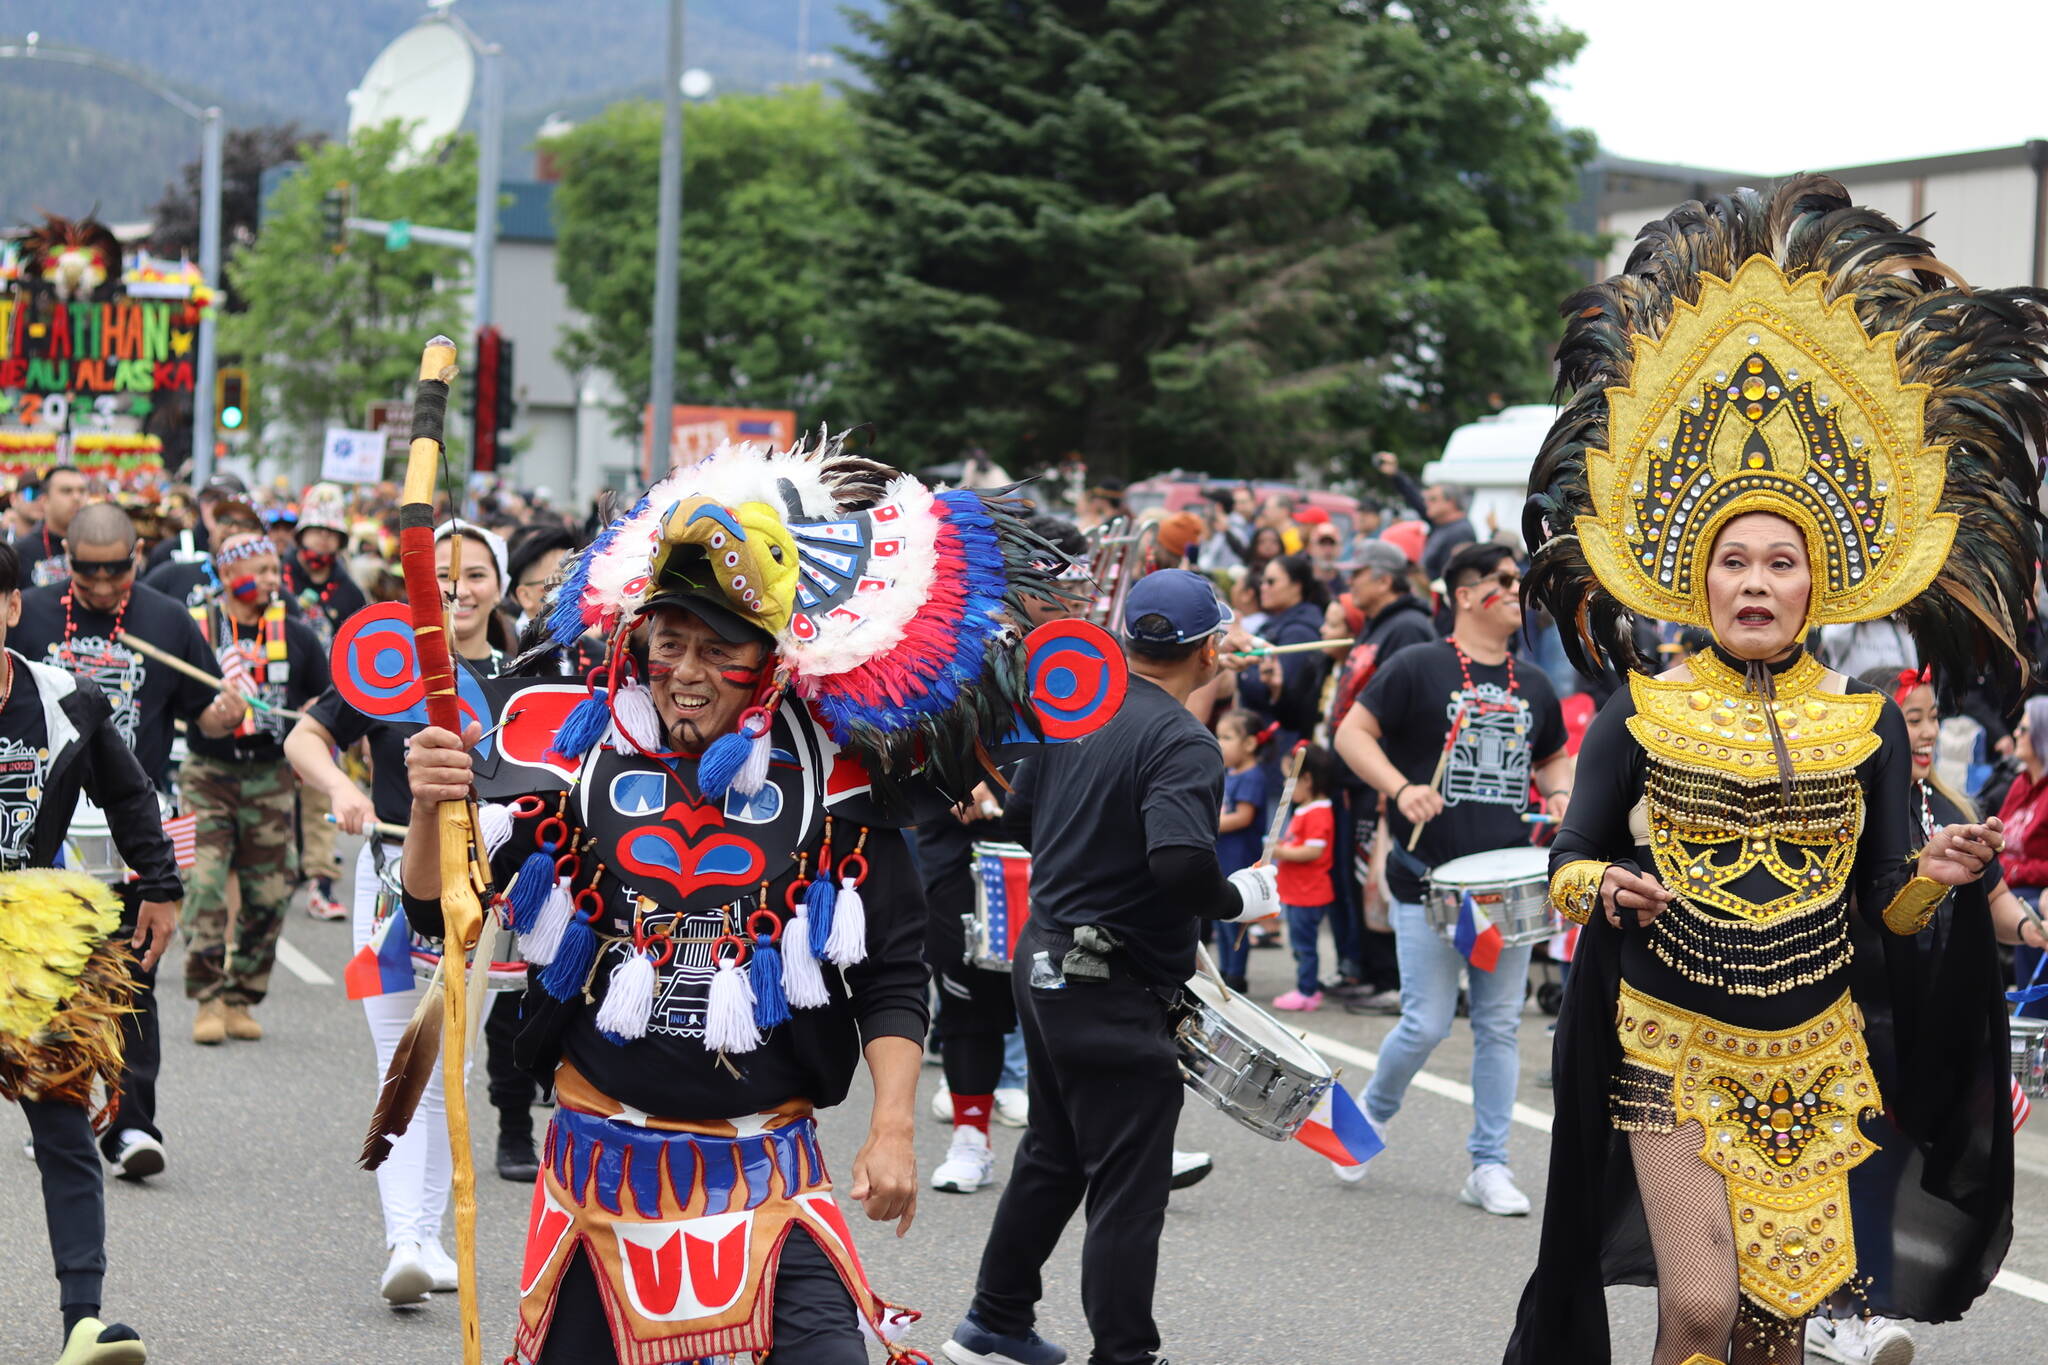 The Ati-Atihan Juneau Group proceeds down Egan Drive during Juneau’s annual Fourth of July parade on Tuesday. The group won the top overall prize among parade participants. (Mark Sabbatini / Juneau Empire)